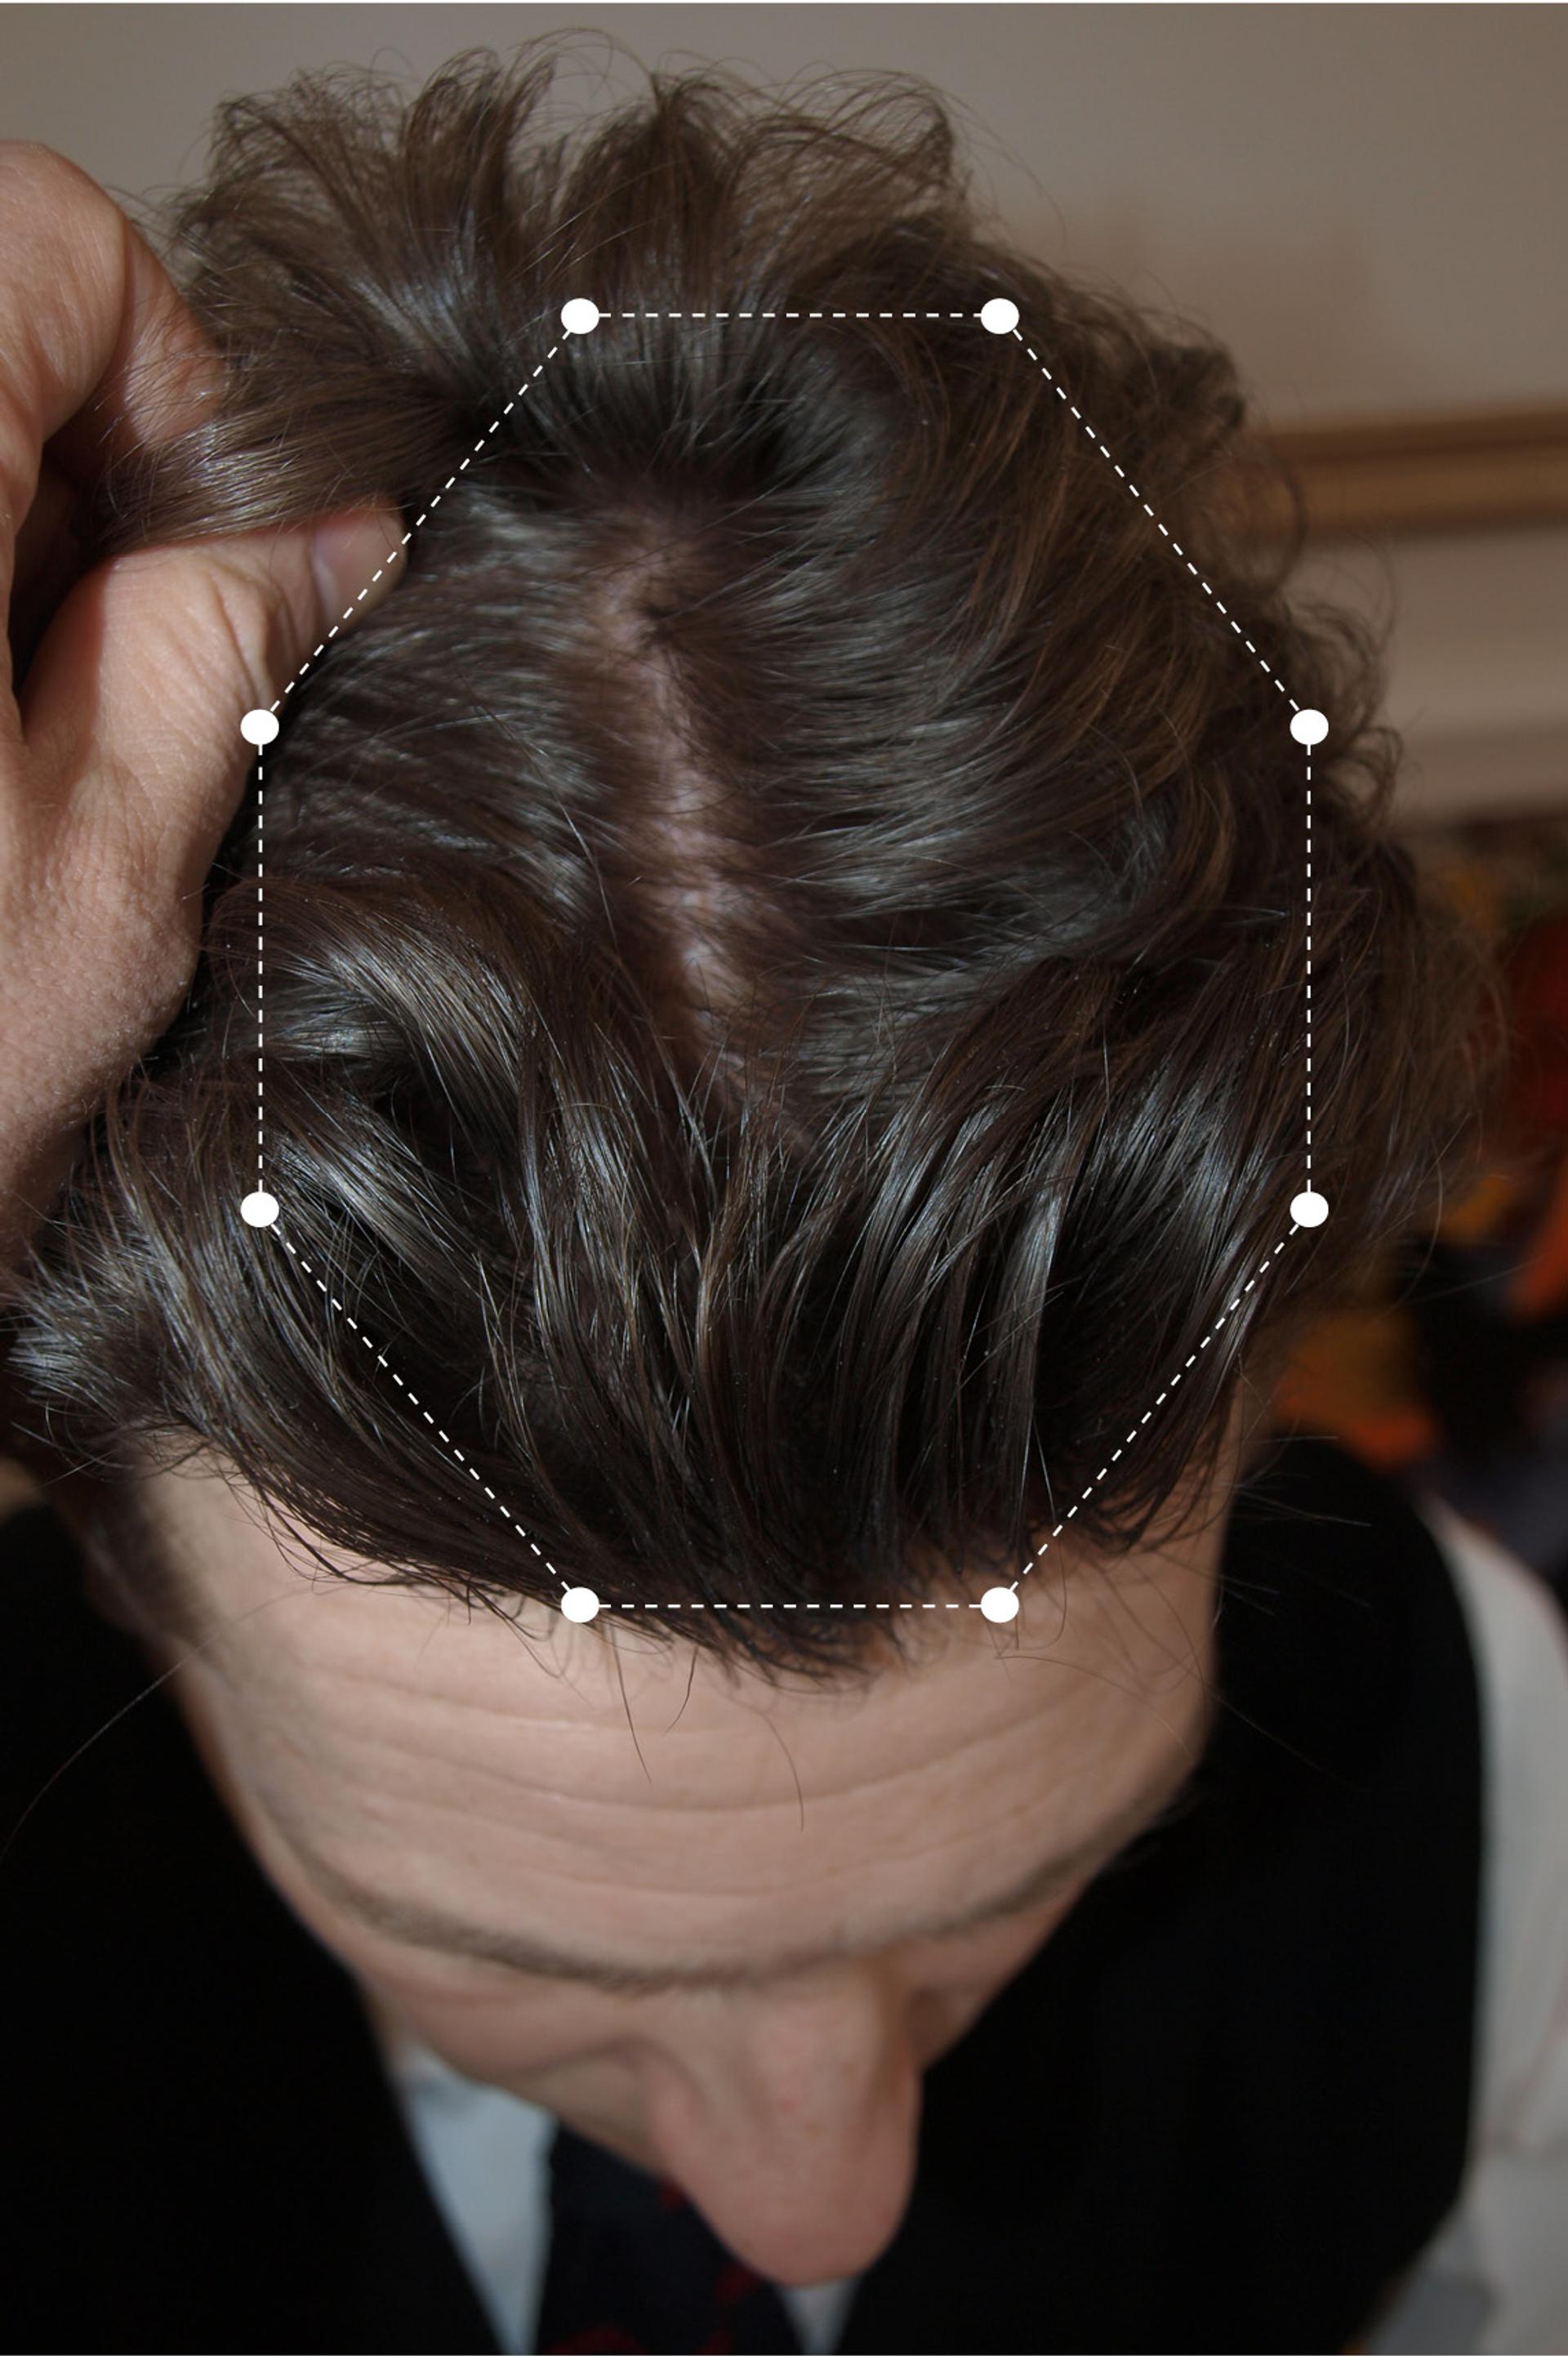 Picture of brunette male's scalp and hair line after using the Harklinikken regime for 9 months